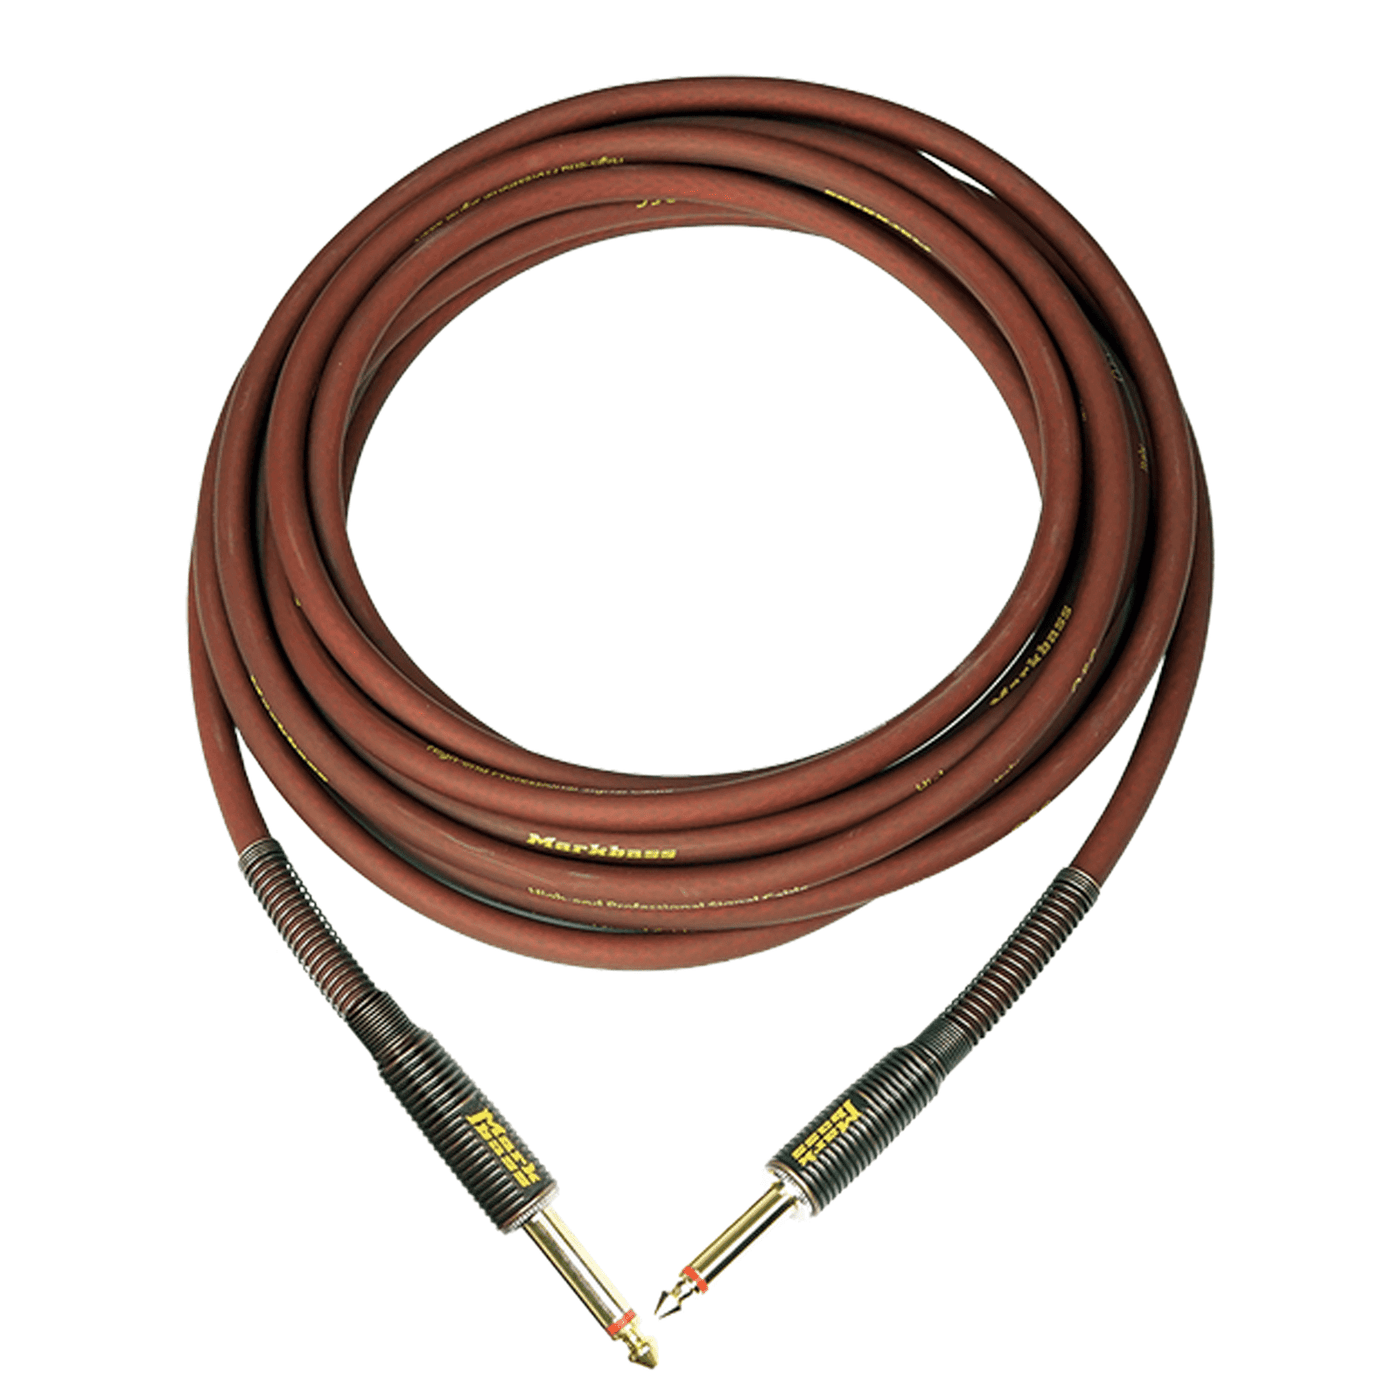 Markbass Super Signal Cable (St to St) - Our MB SUPER SIGNAL CABLES are not dedicated to specific instruments or music styles. We actually think it's quite impossible to feel any difference between cables that are meant to be used on different genres and